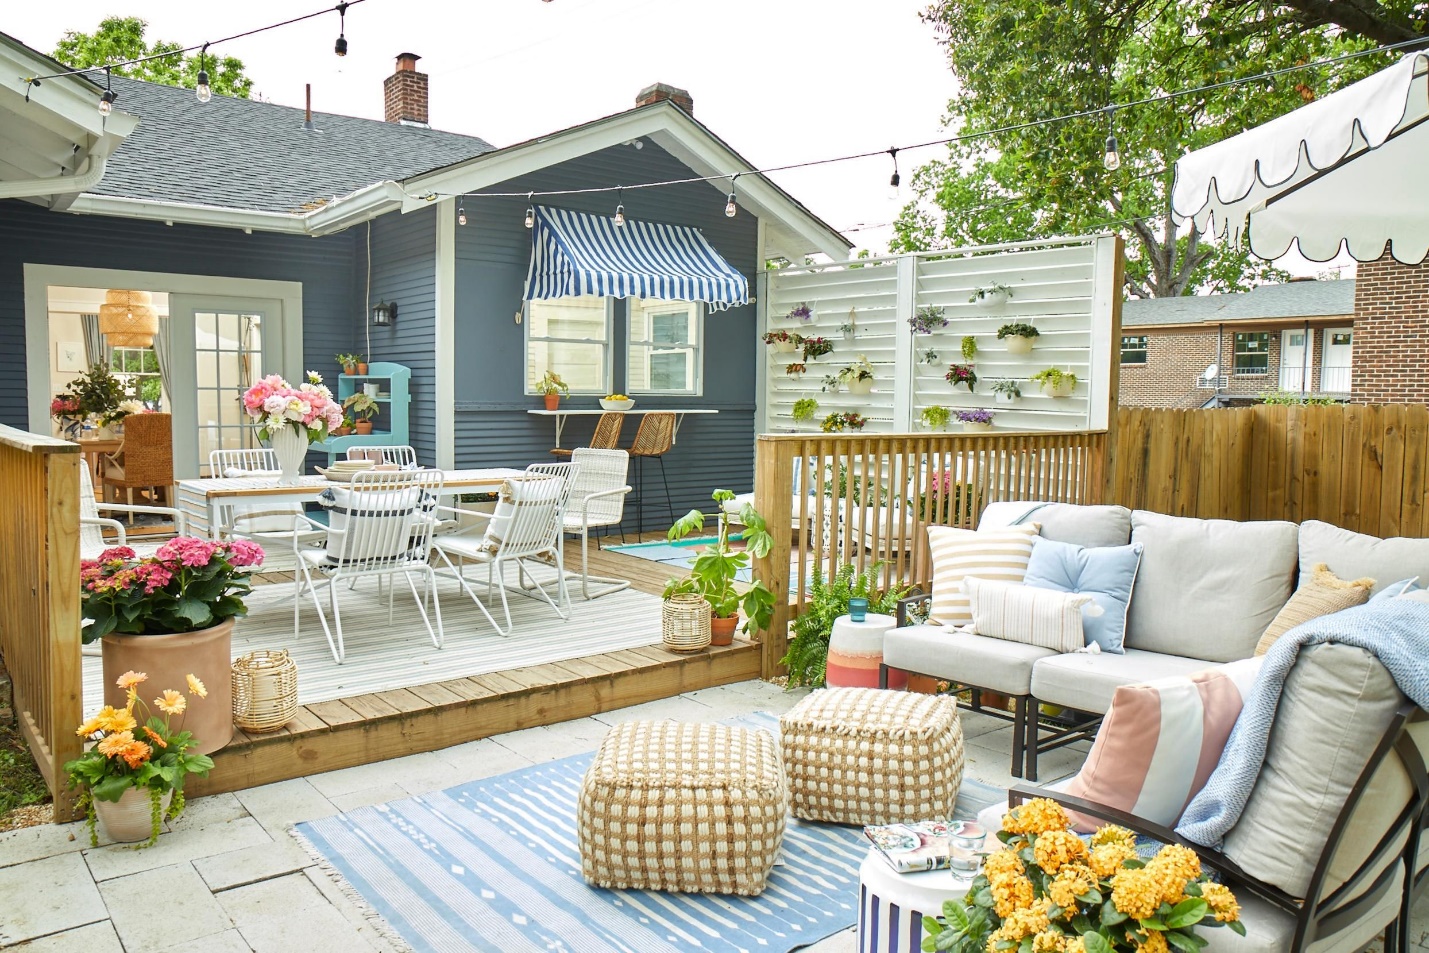 10 Gorgeous Ways to Decorate Your Patio